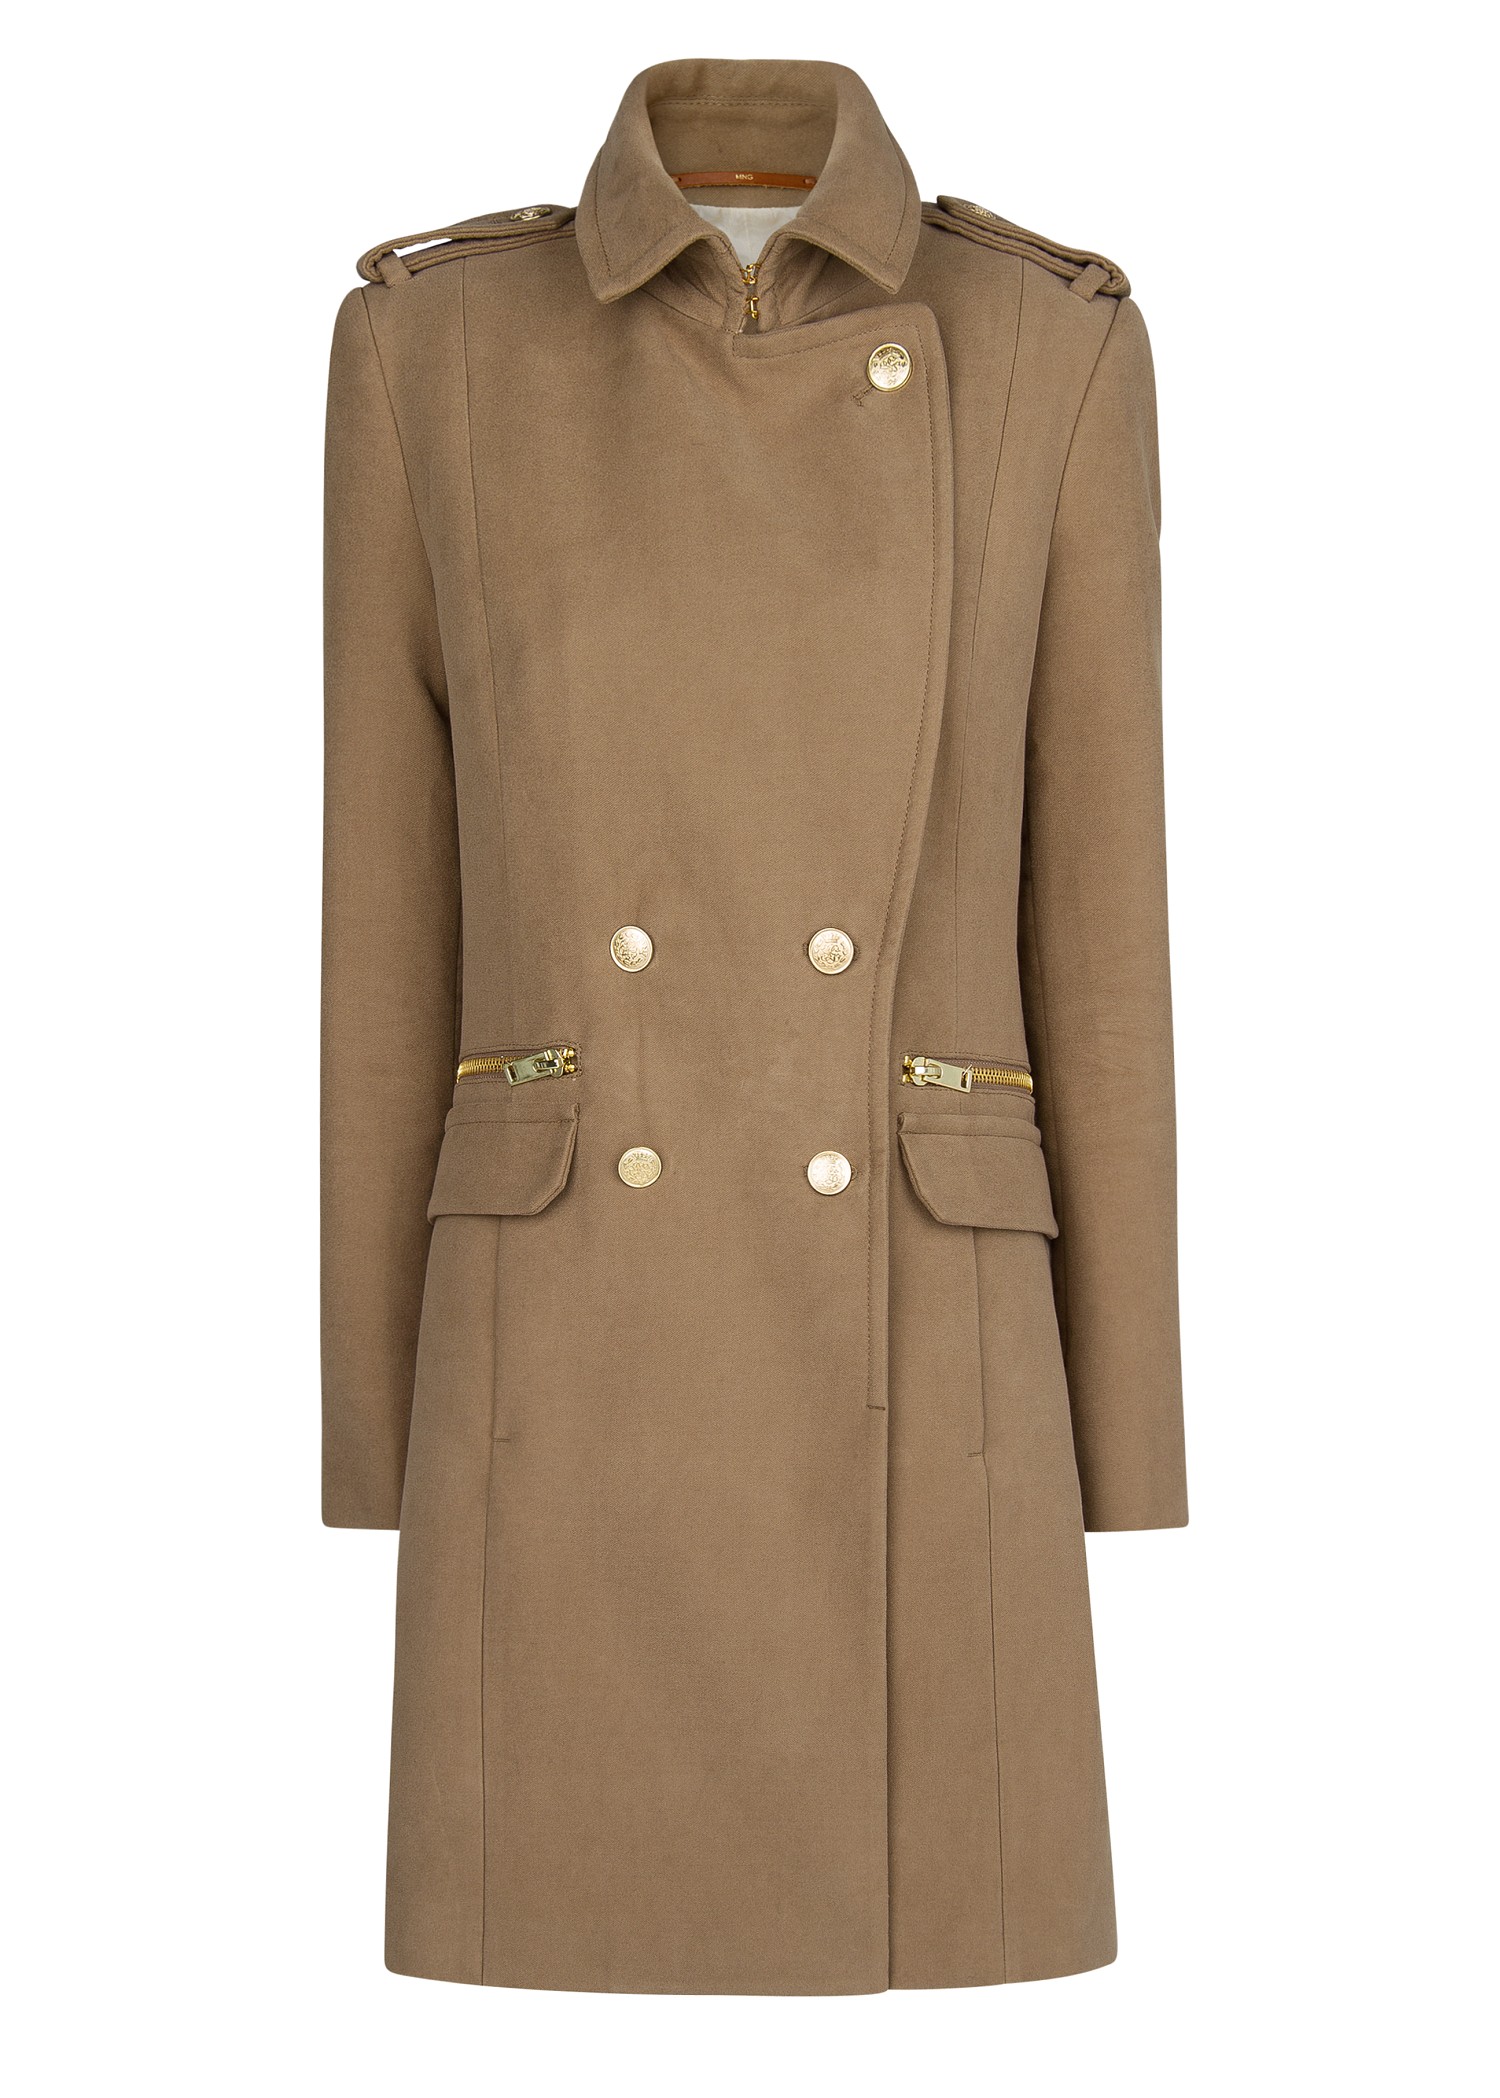 Lyst - Mango Military Style Long Coat in Natural